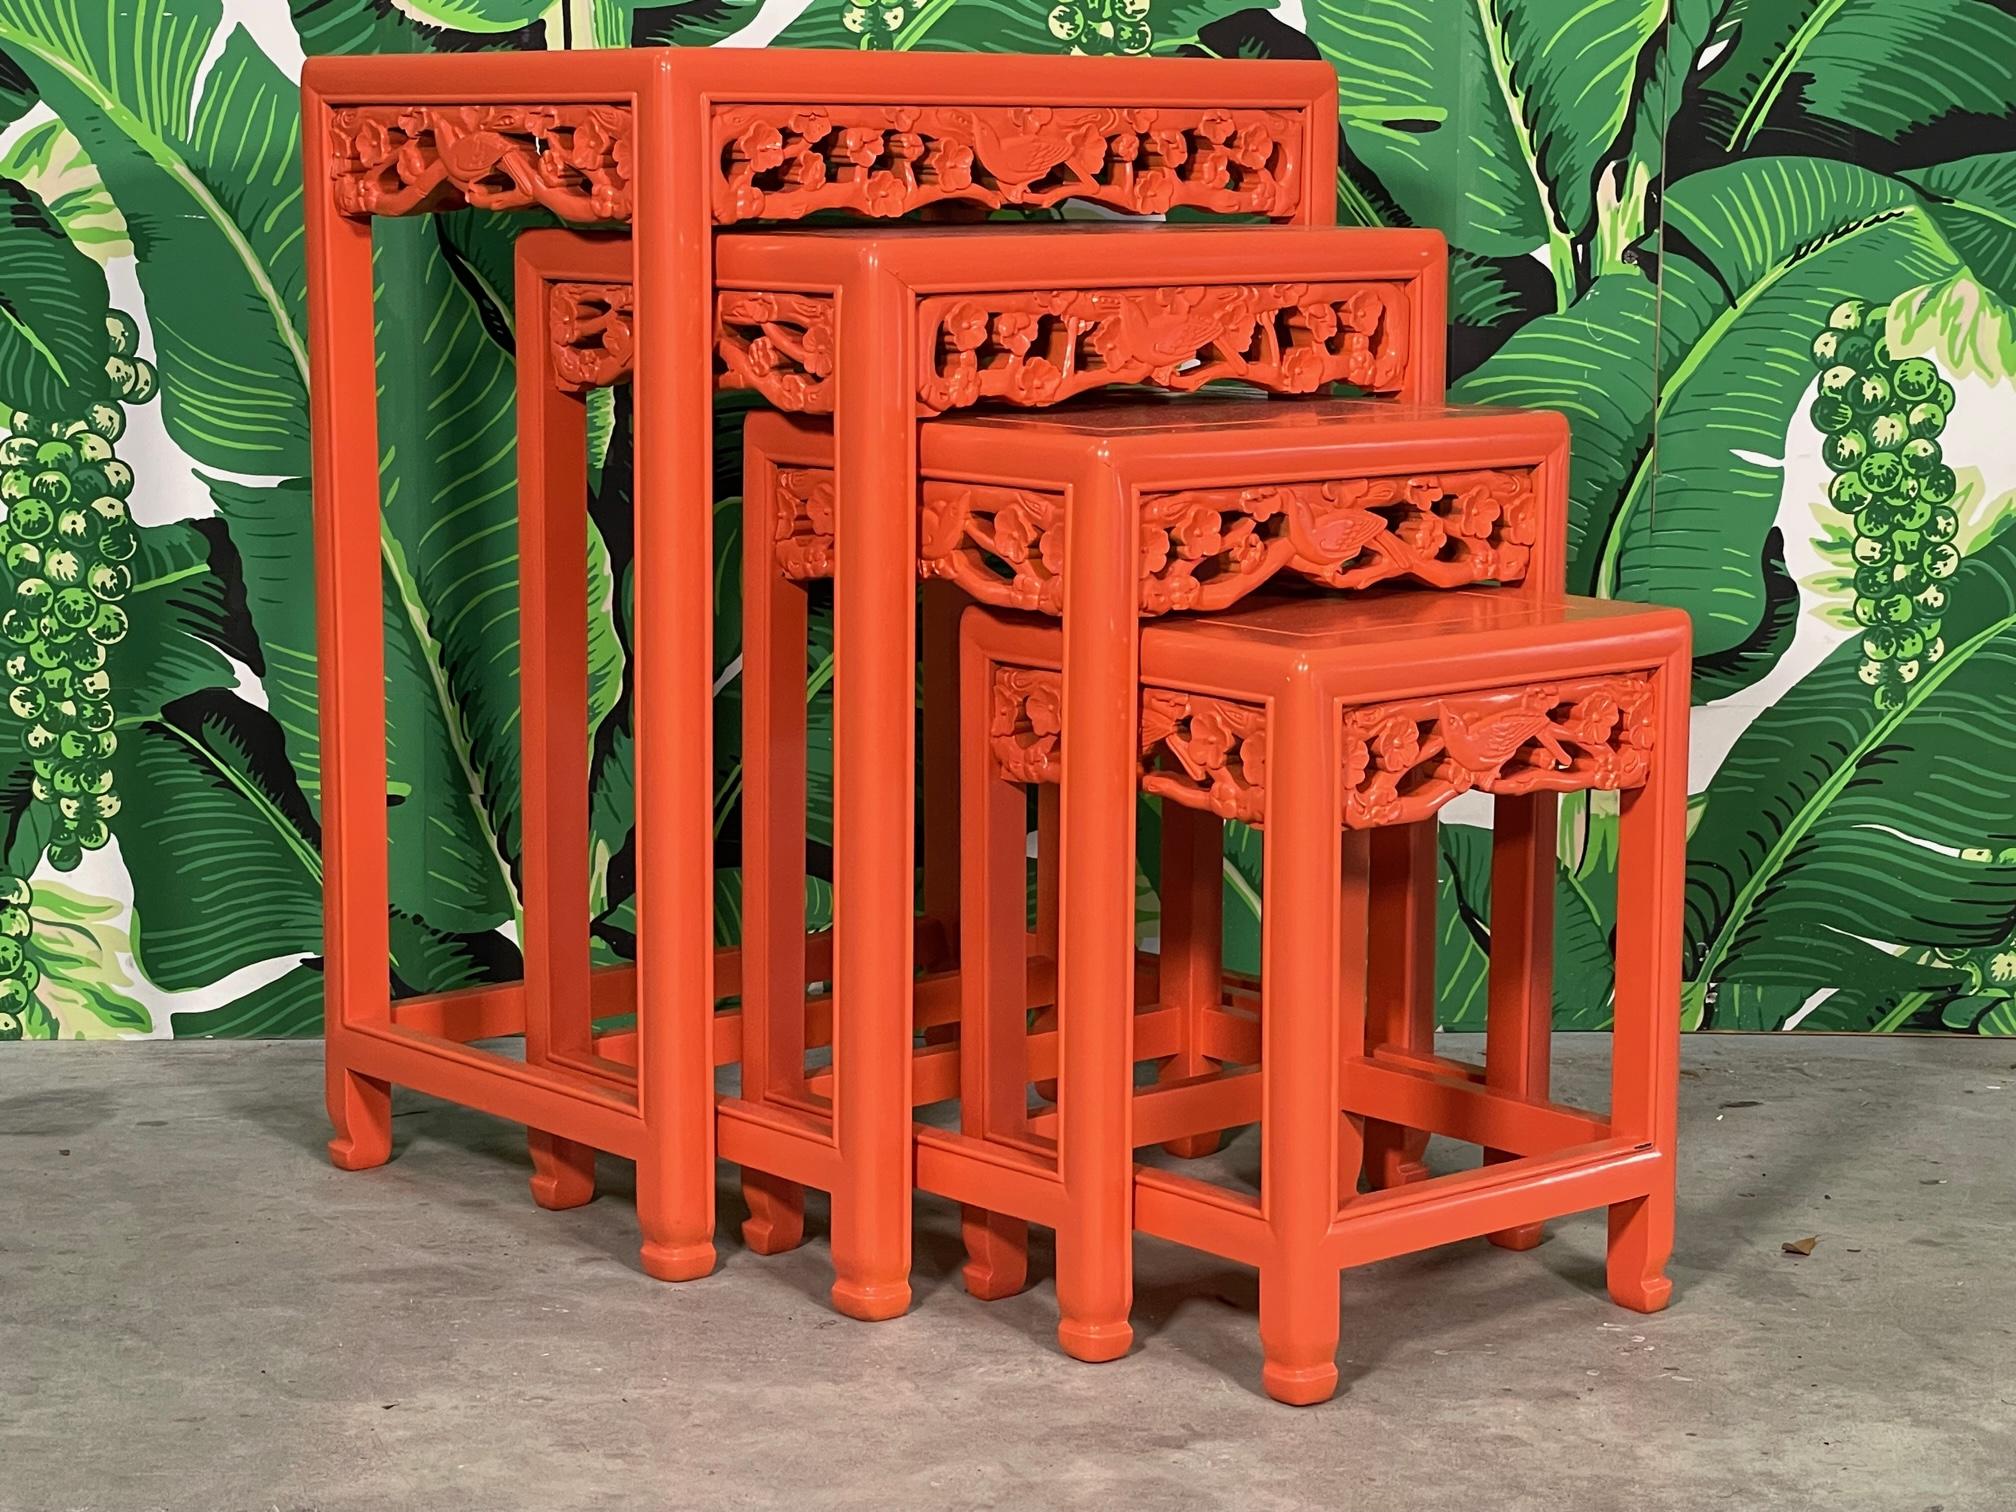 Set of four Asian carved wood nesting tables or stacking tables feature hand carved friezes with a bird and flower motif. Good condition with minor imperfections to the newly lacquered finish.
Size of each table:
Table 1: 19.75